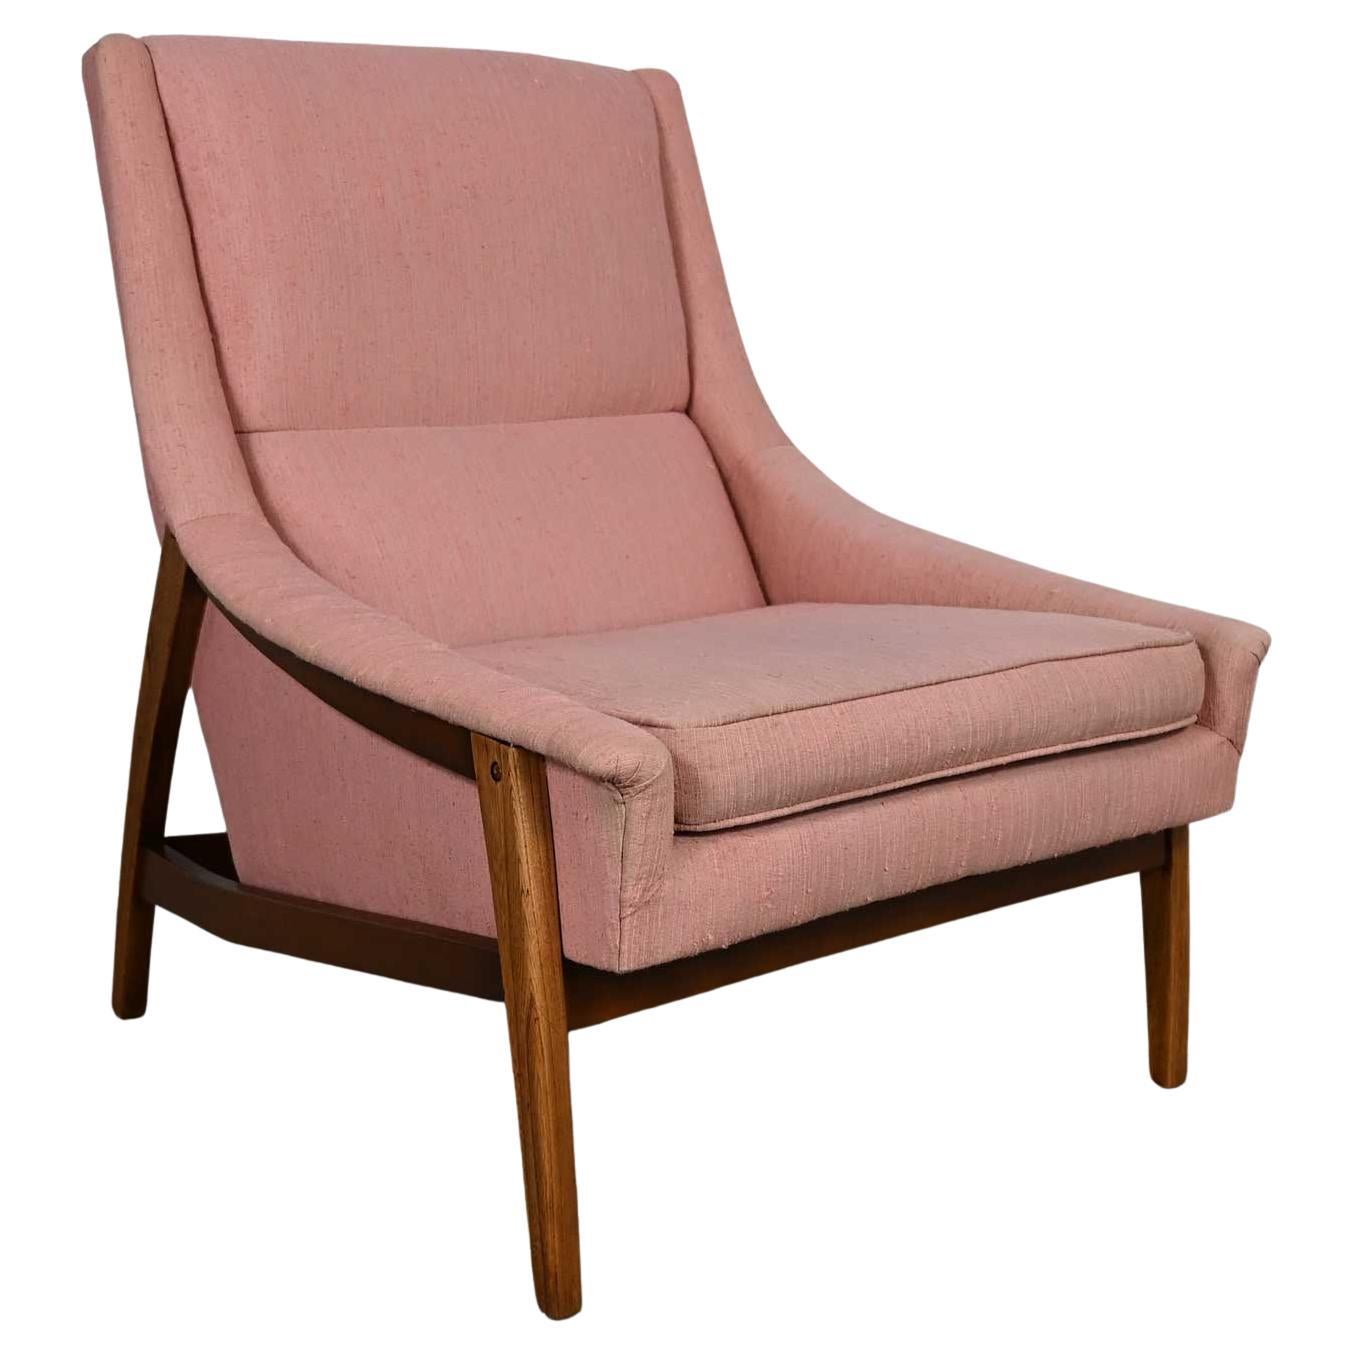 MCM Walnut & Ash Frame with Pink Fabric Lounge Chair Style of Dux or Kroehler For Sale